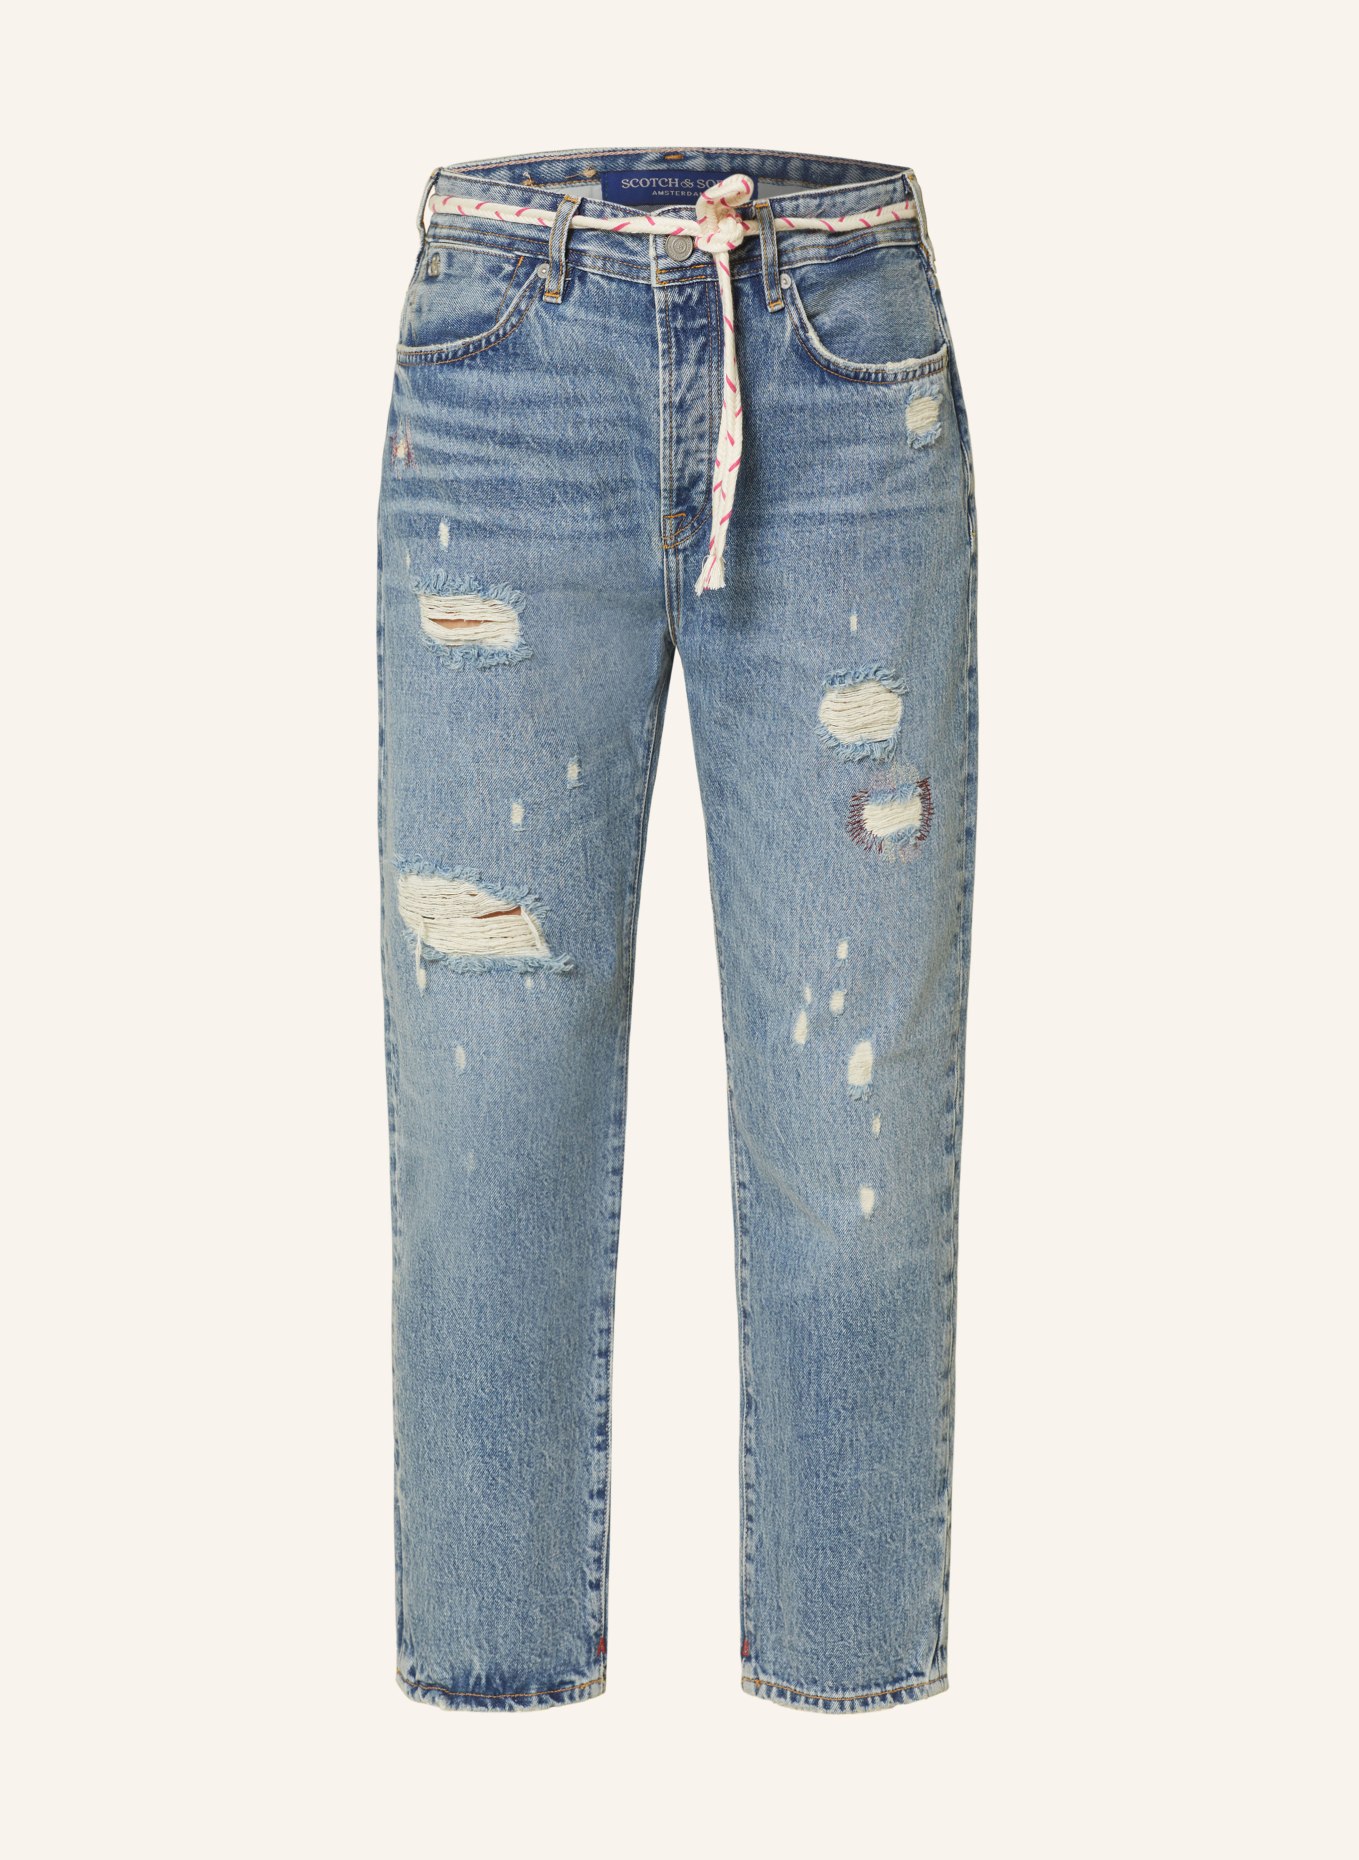 SCOTCH & SODA Destroyed jeans THE BUZZ, Color: 7066 All Tied Up (Image 1)